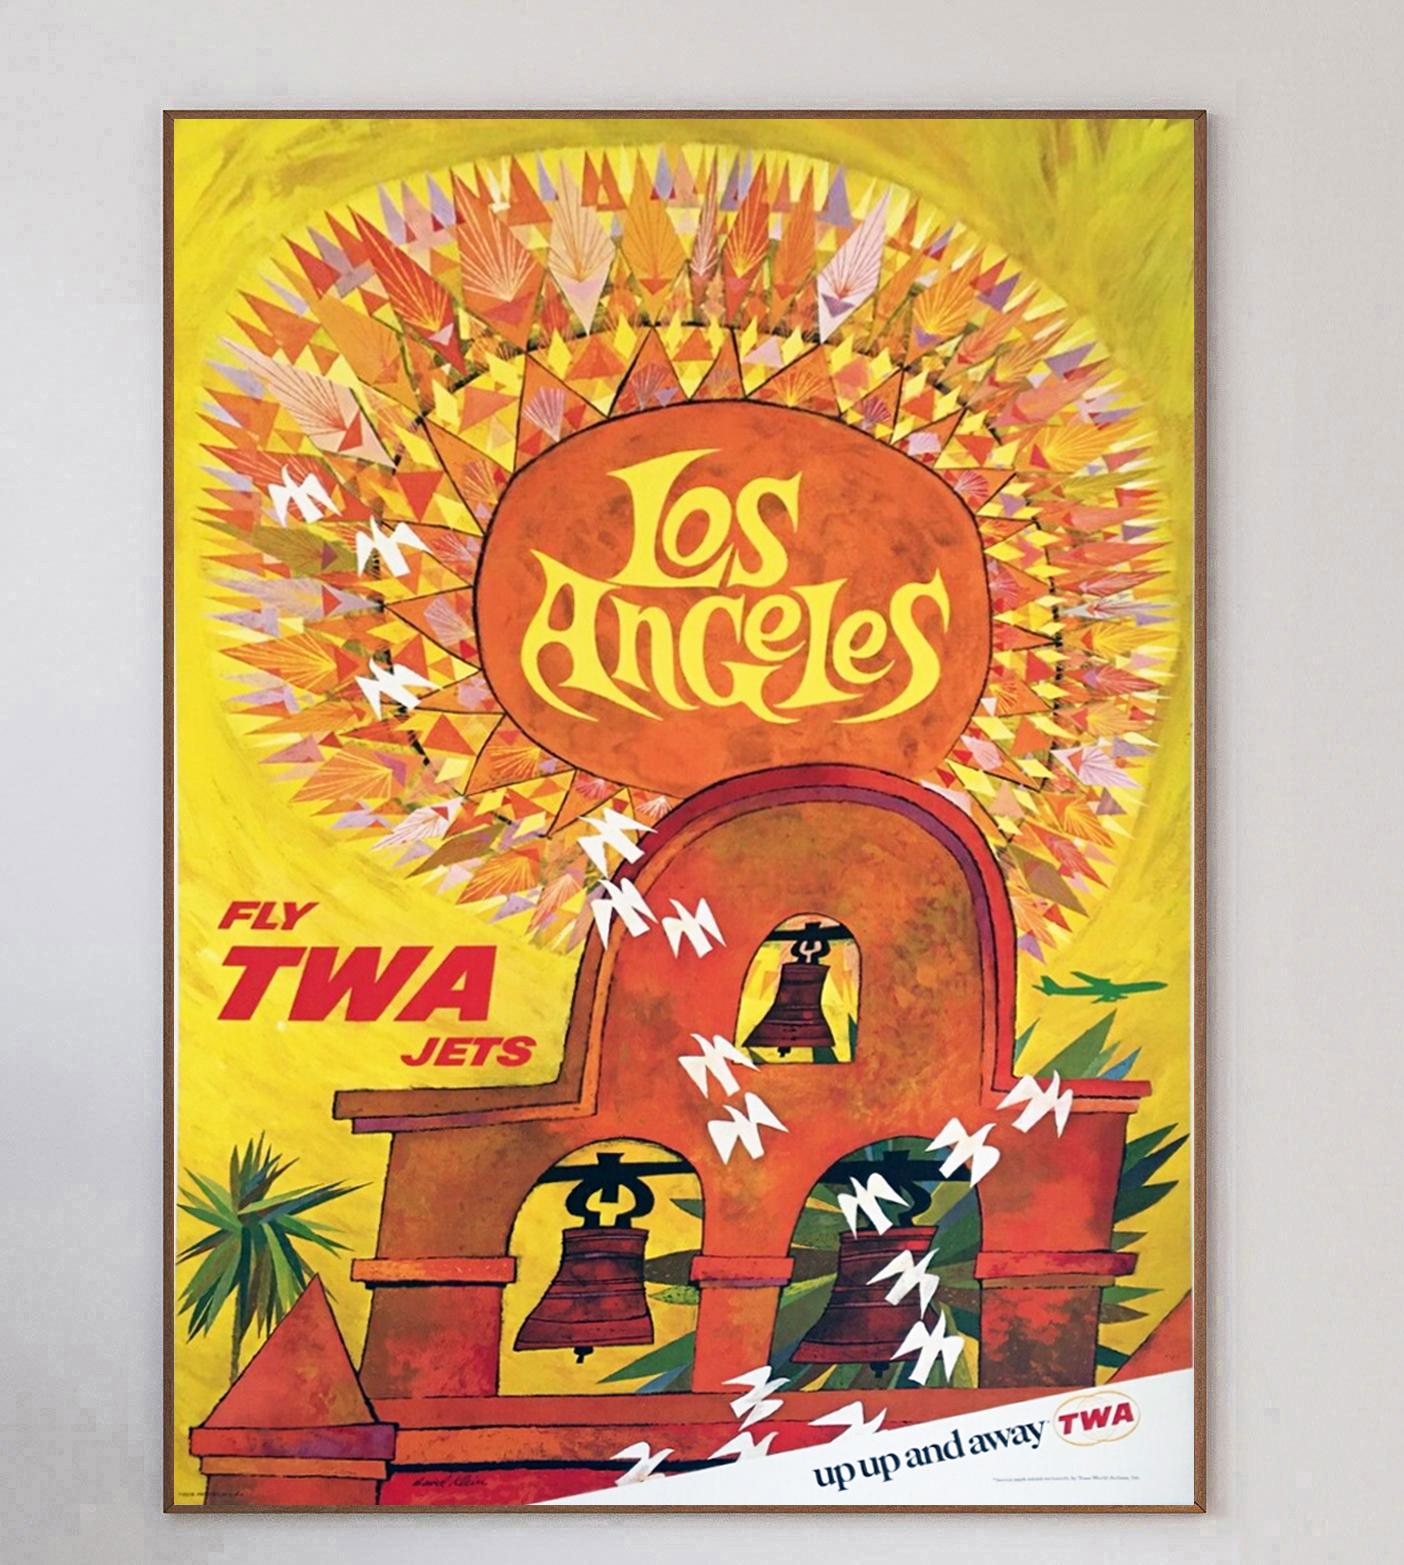 This poster was created in 1959 for Howard Hughes’ Trans World Airlines promoting their routes to Los Angeles, California. Illustrated by influential American artist David Klein, this design features a wonderfully stylized view of the California